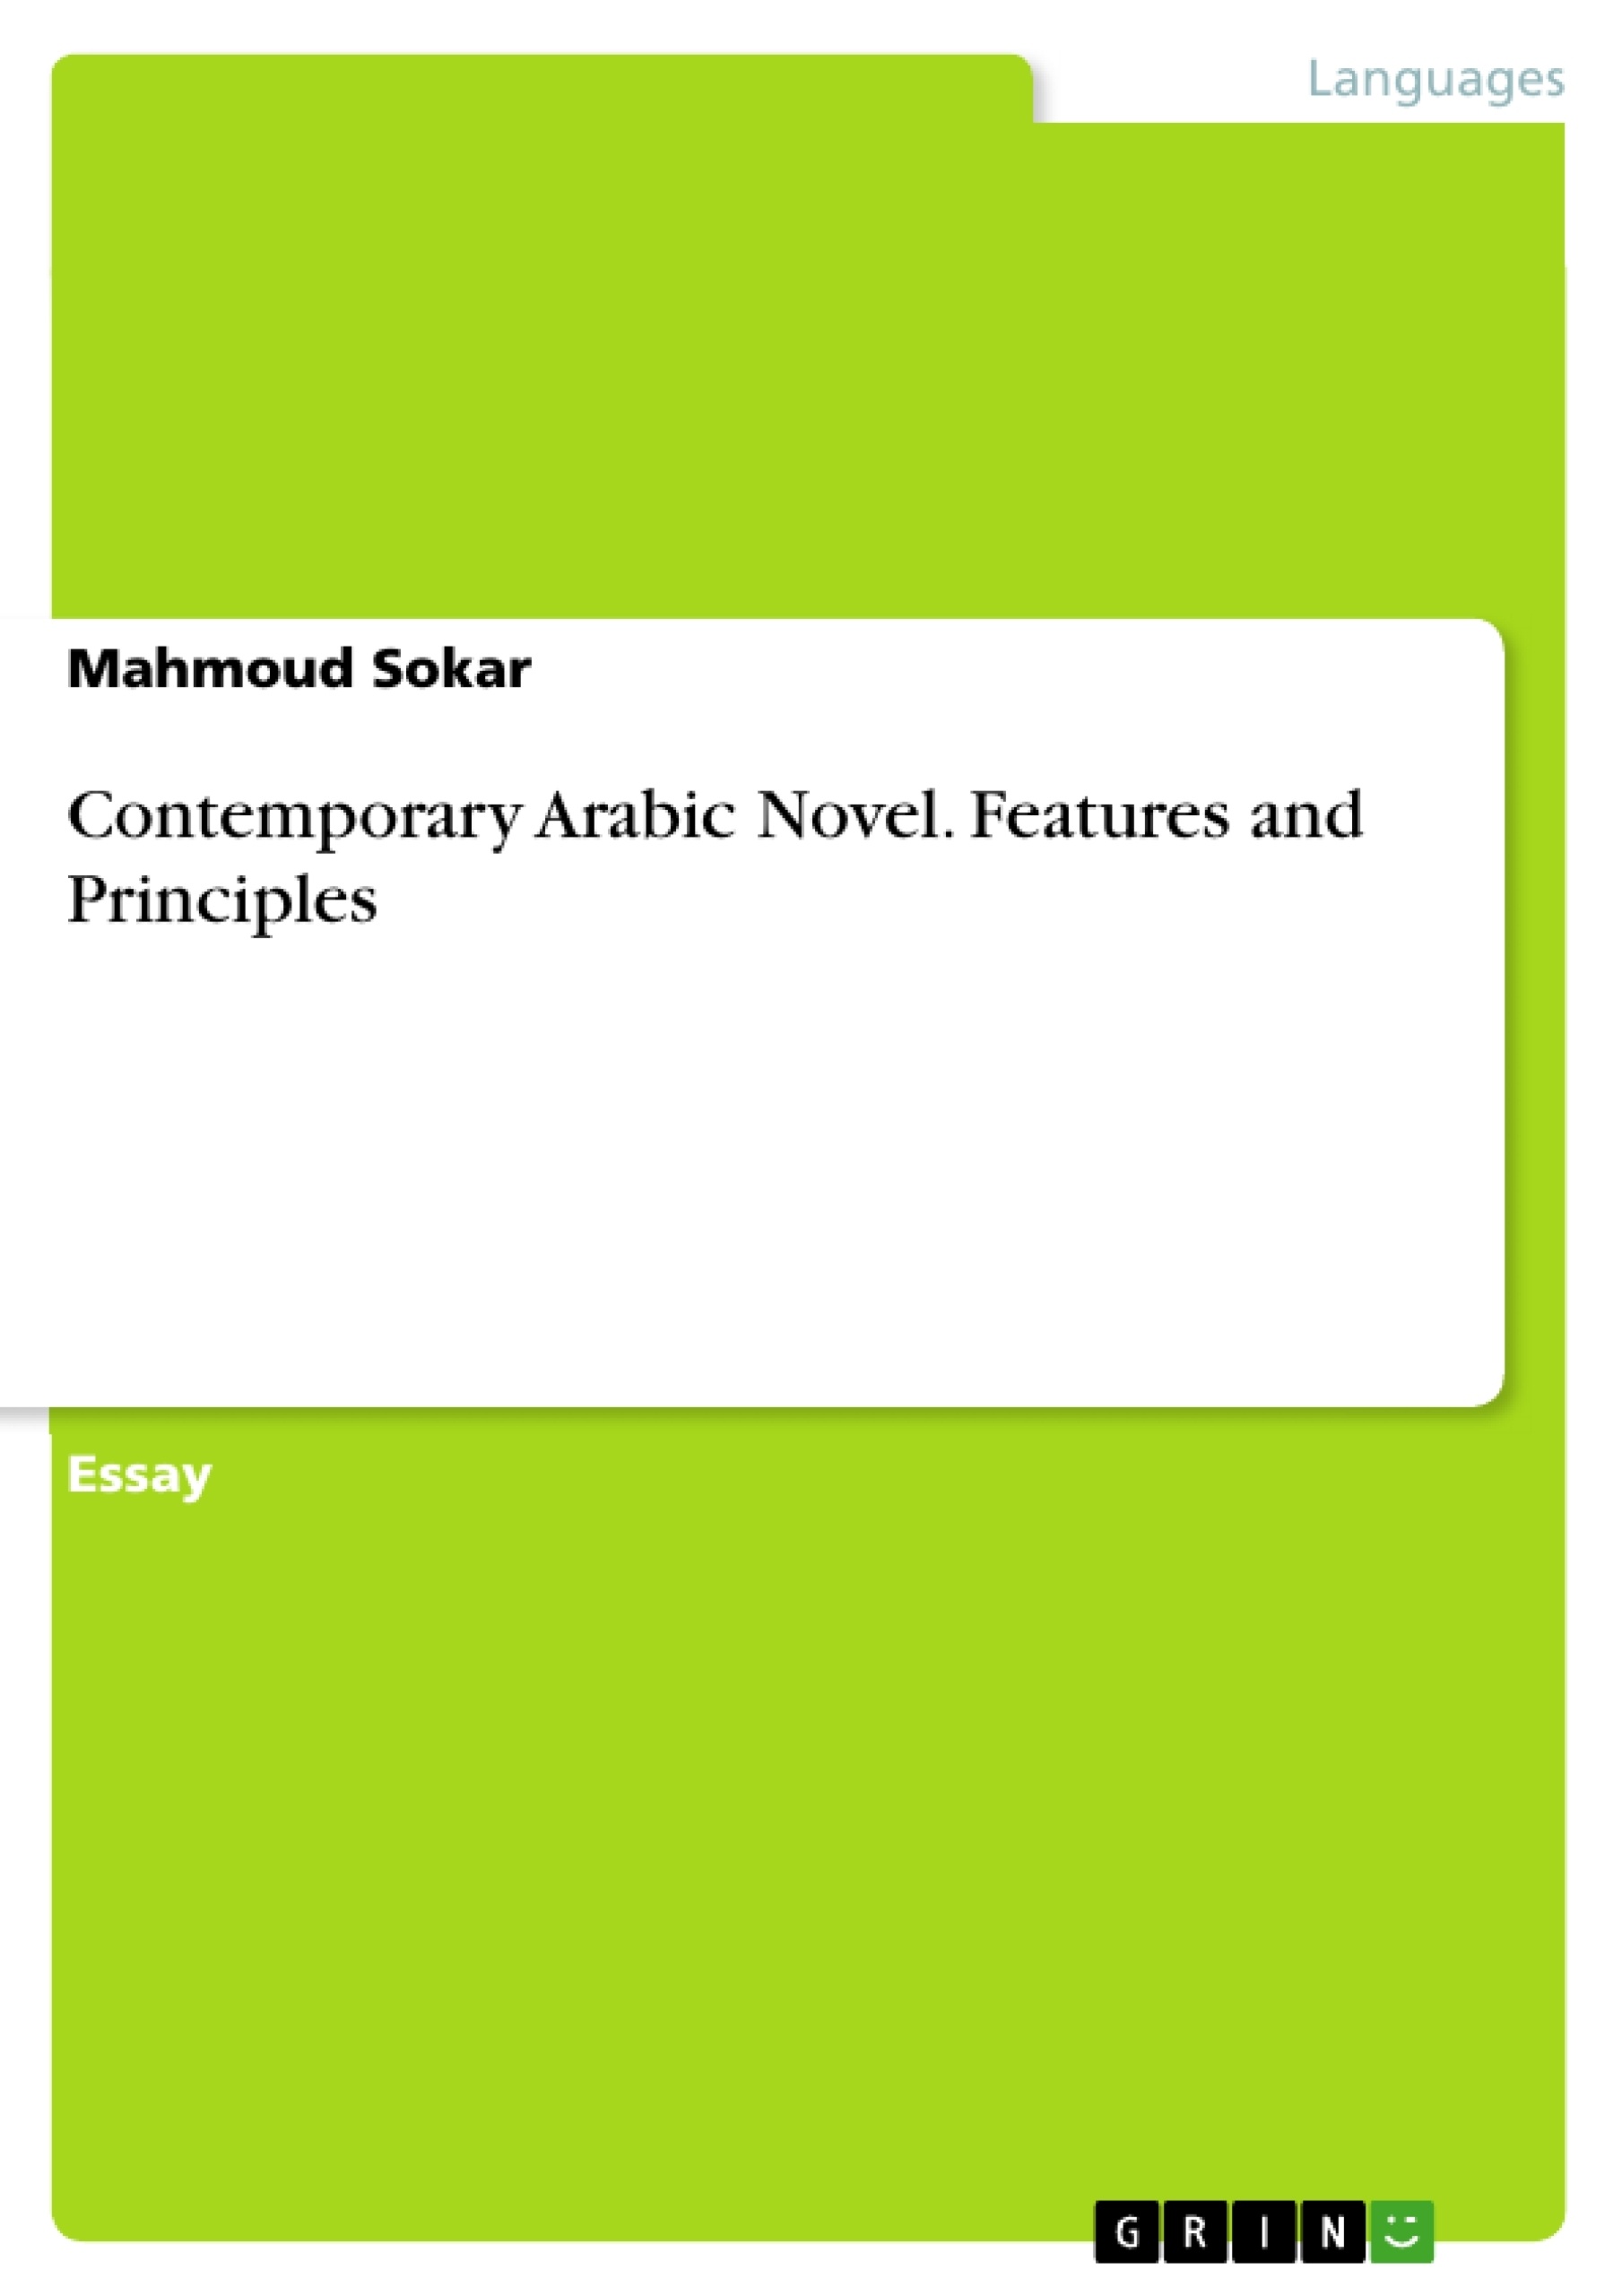 Title: Contemporary Arabic Novel. Features and Principles